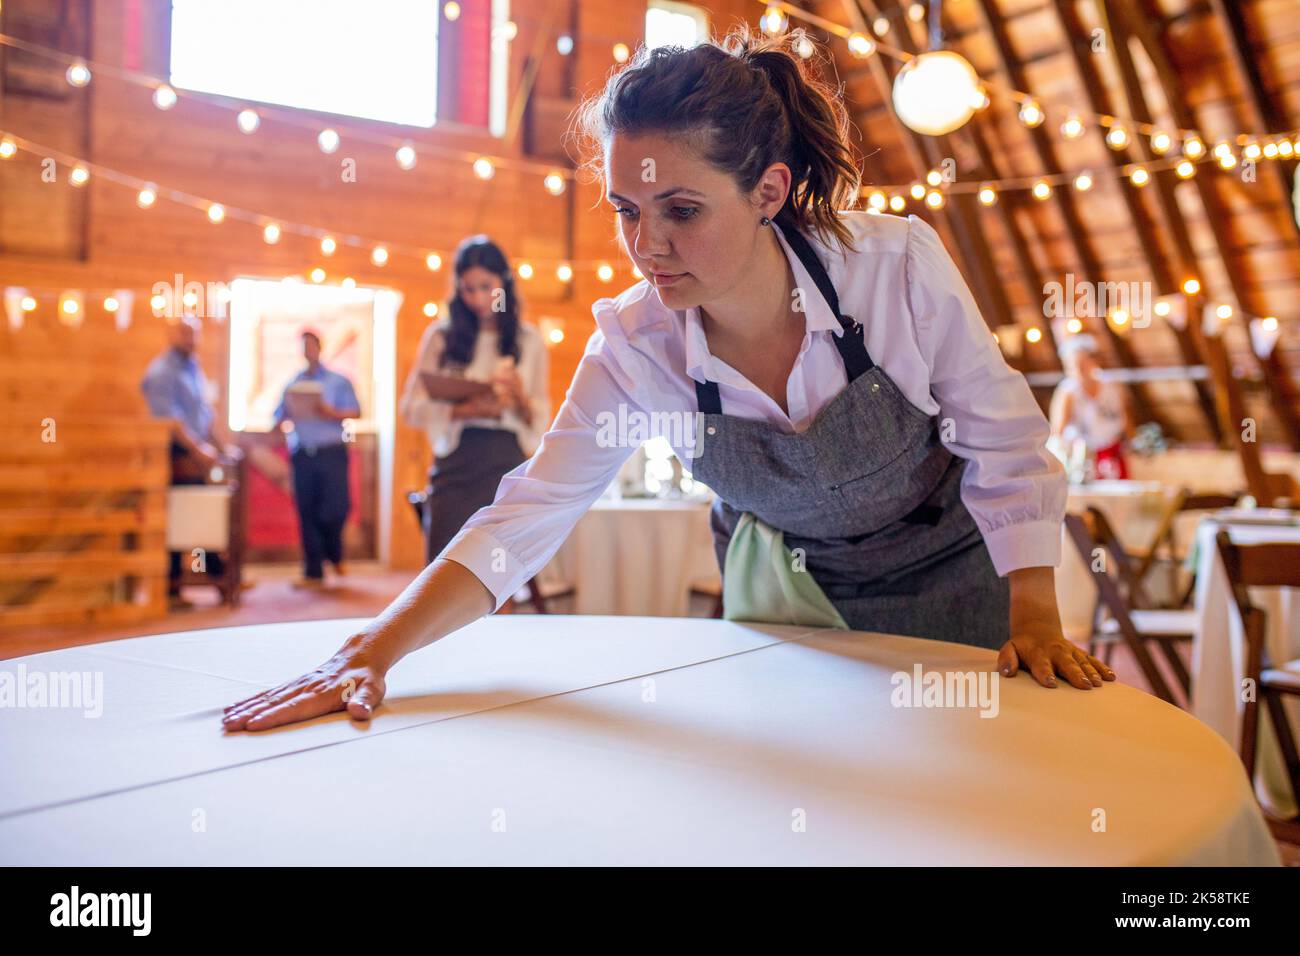 Dedicated female server smoothing tablecloth for wedding reception Stock Photo